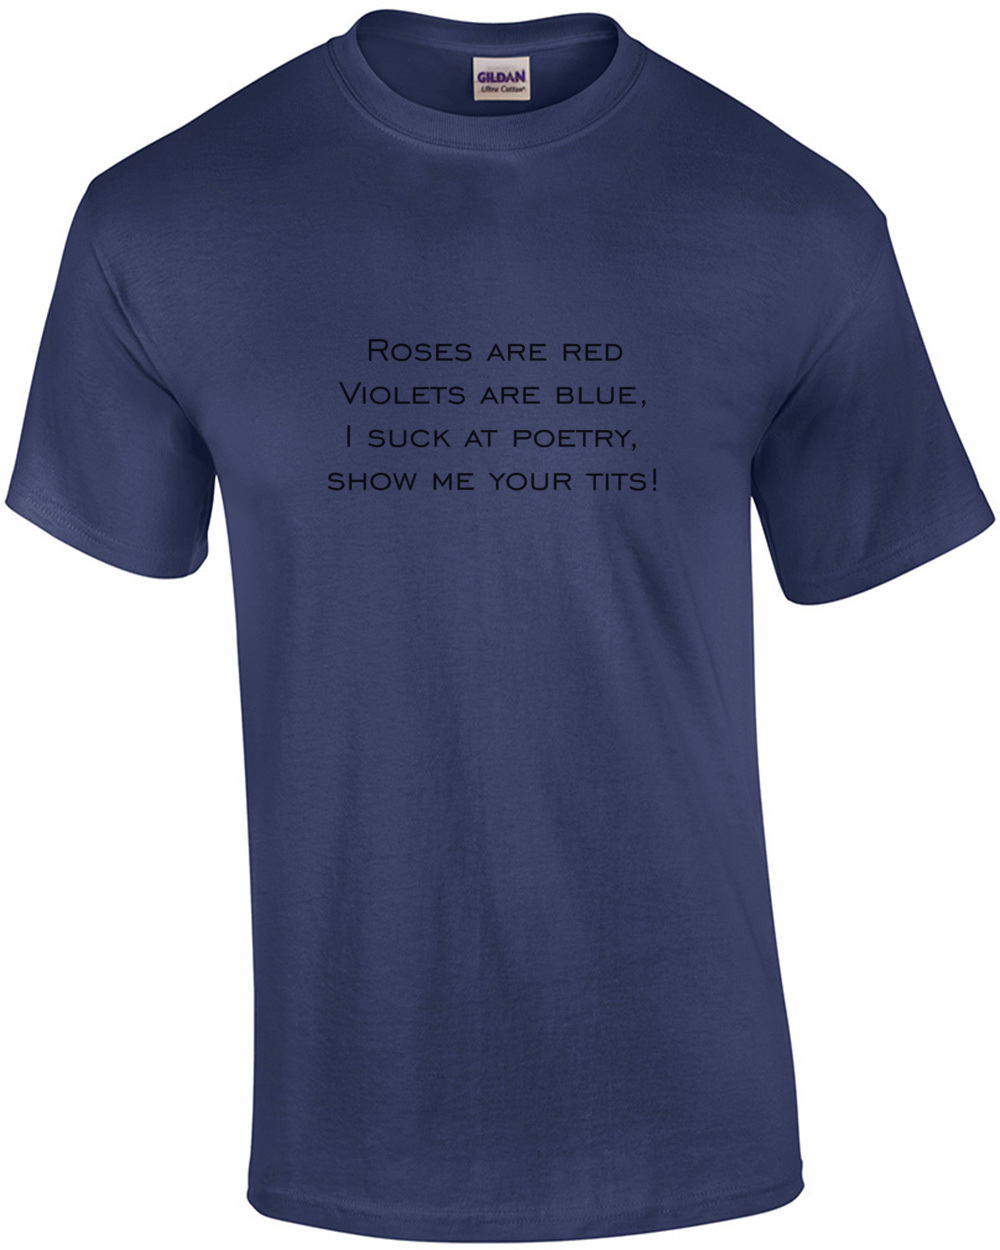 Roses are red Violets are blue, I suck at poetry, show me your tits! Shirt